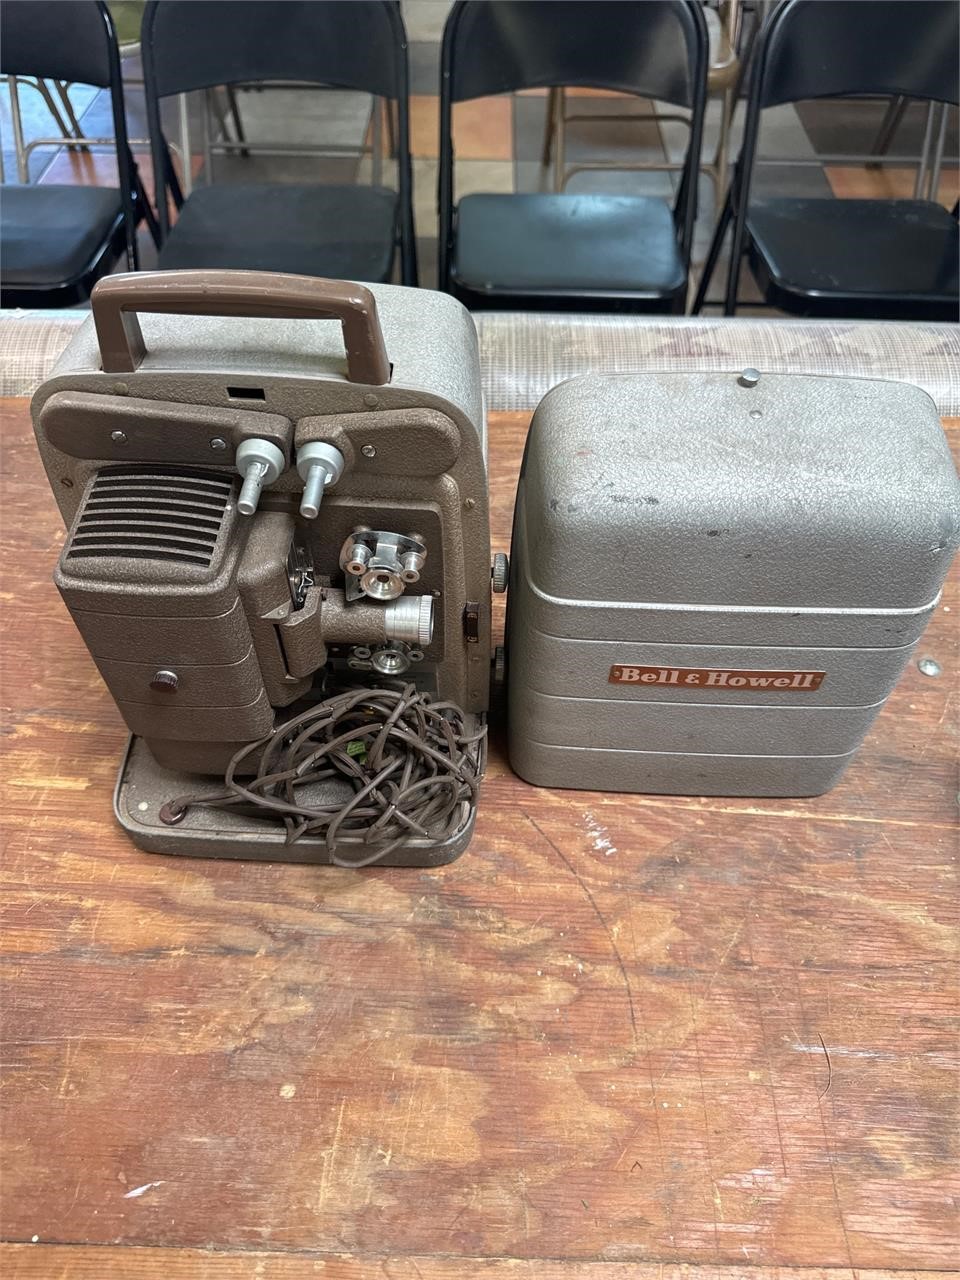 Bell & Howell 8mm Film Projector